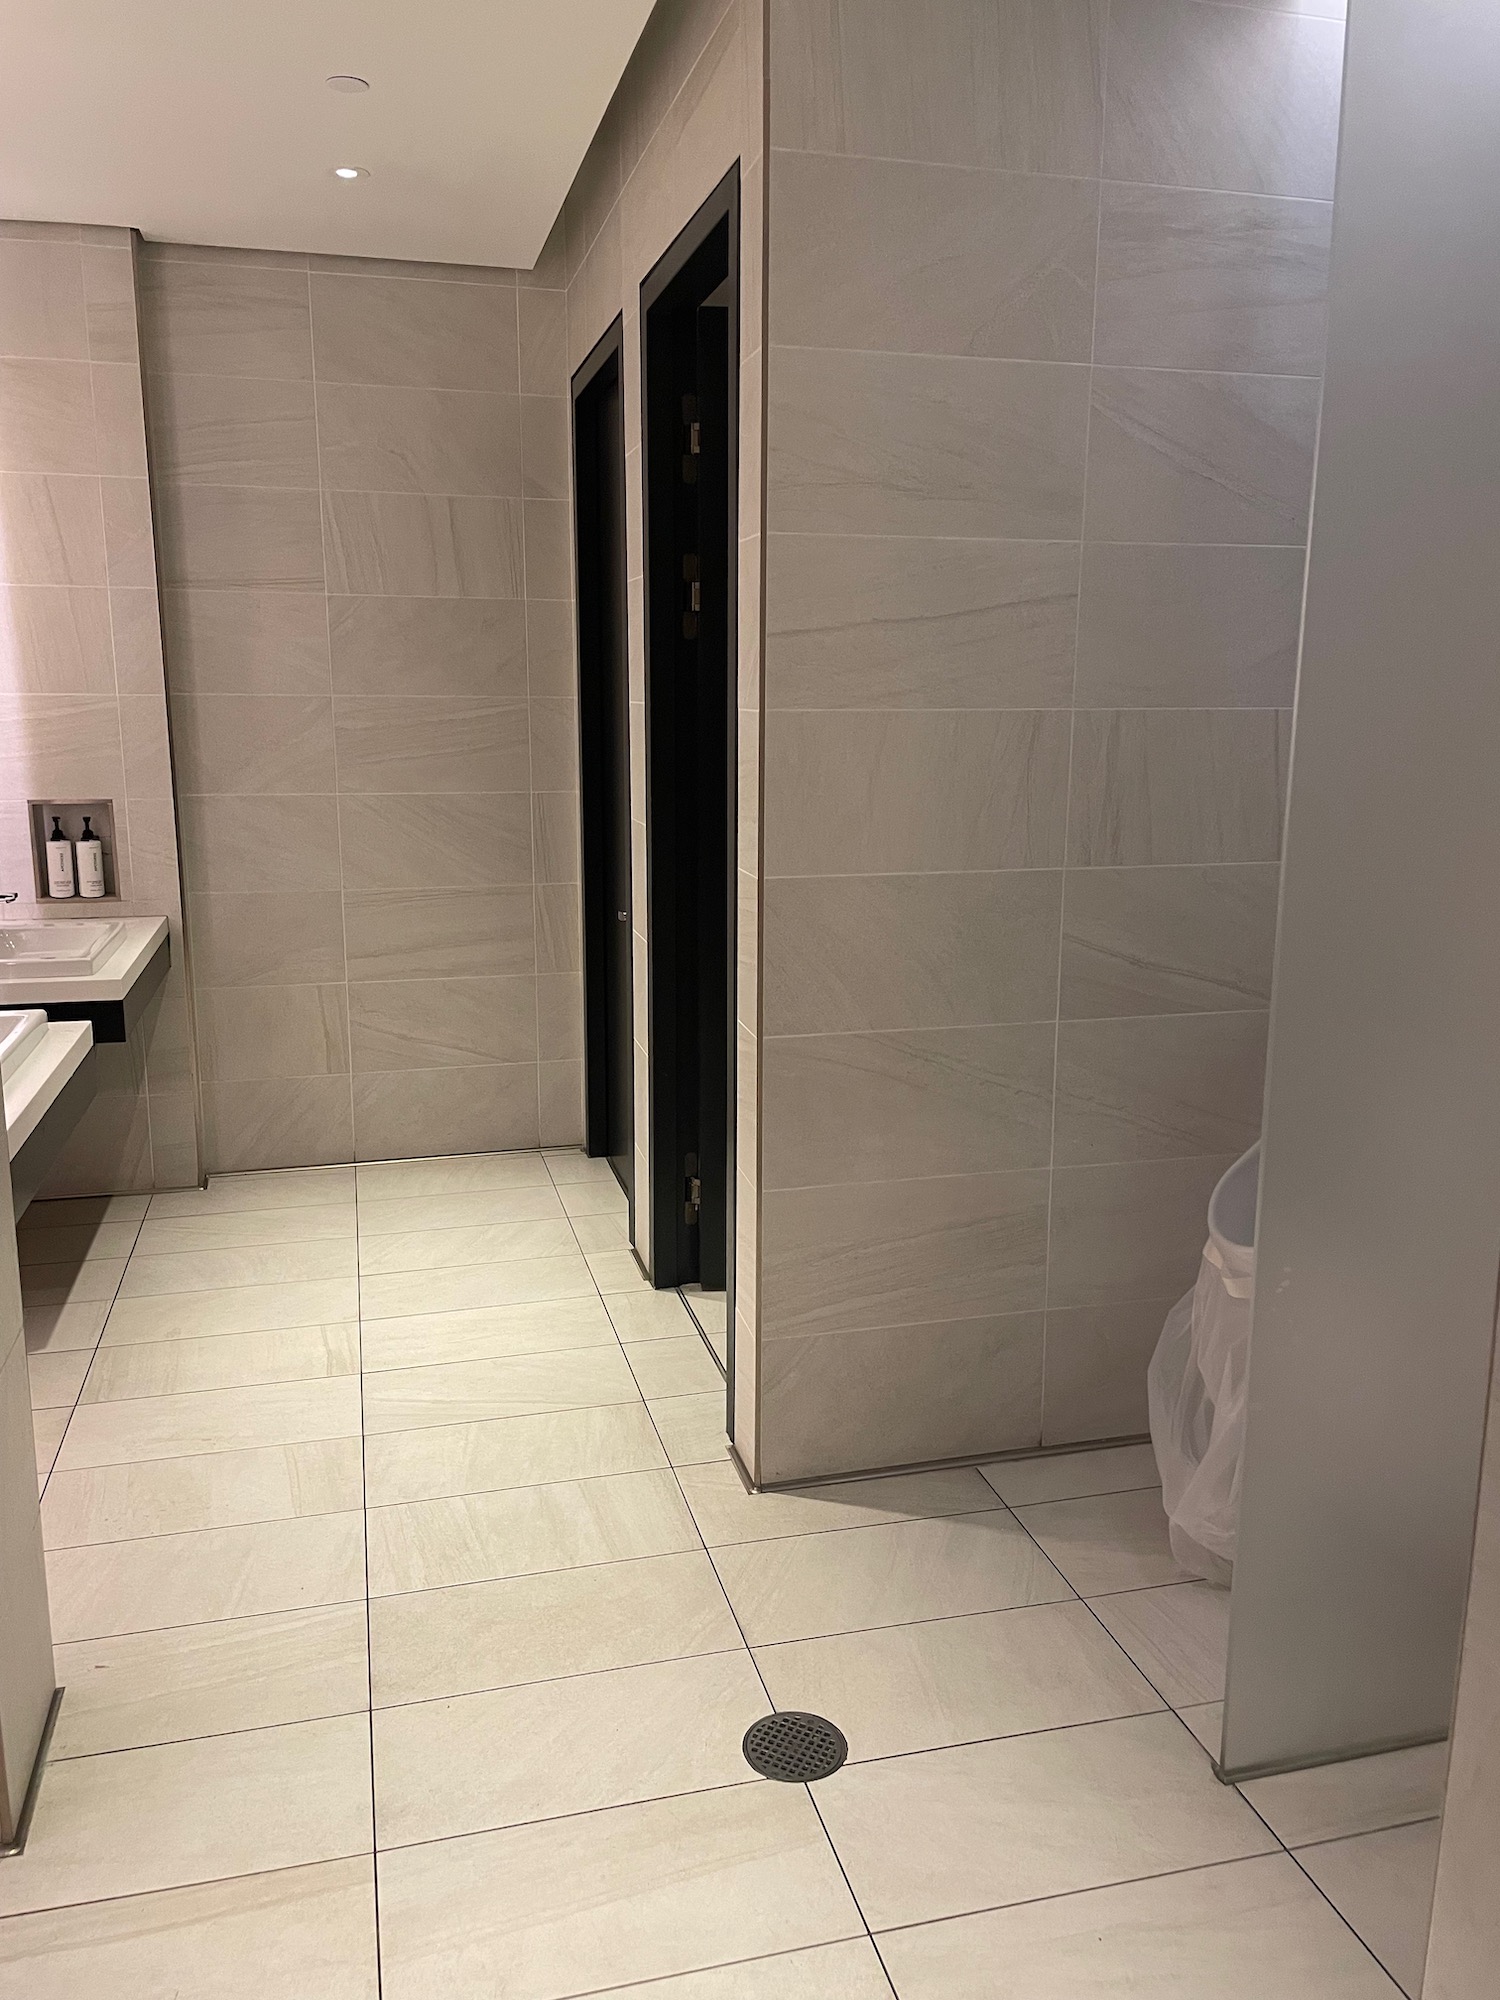 a bathroom with a shower stall and sink